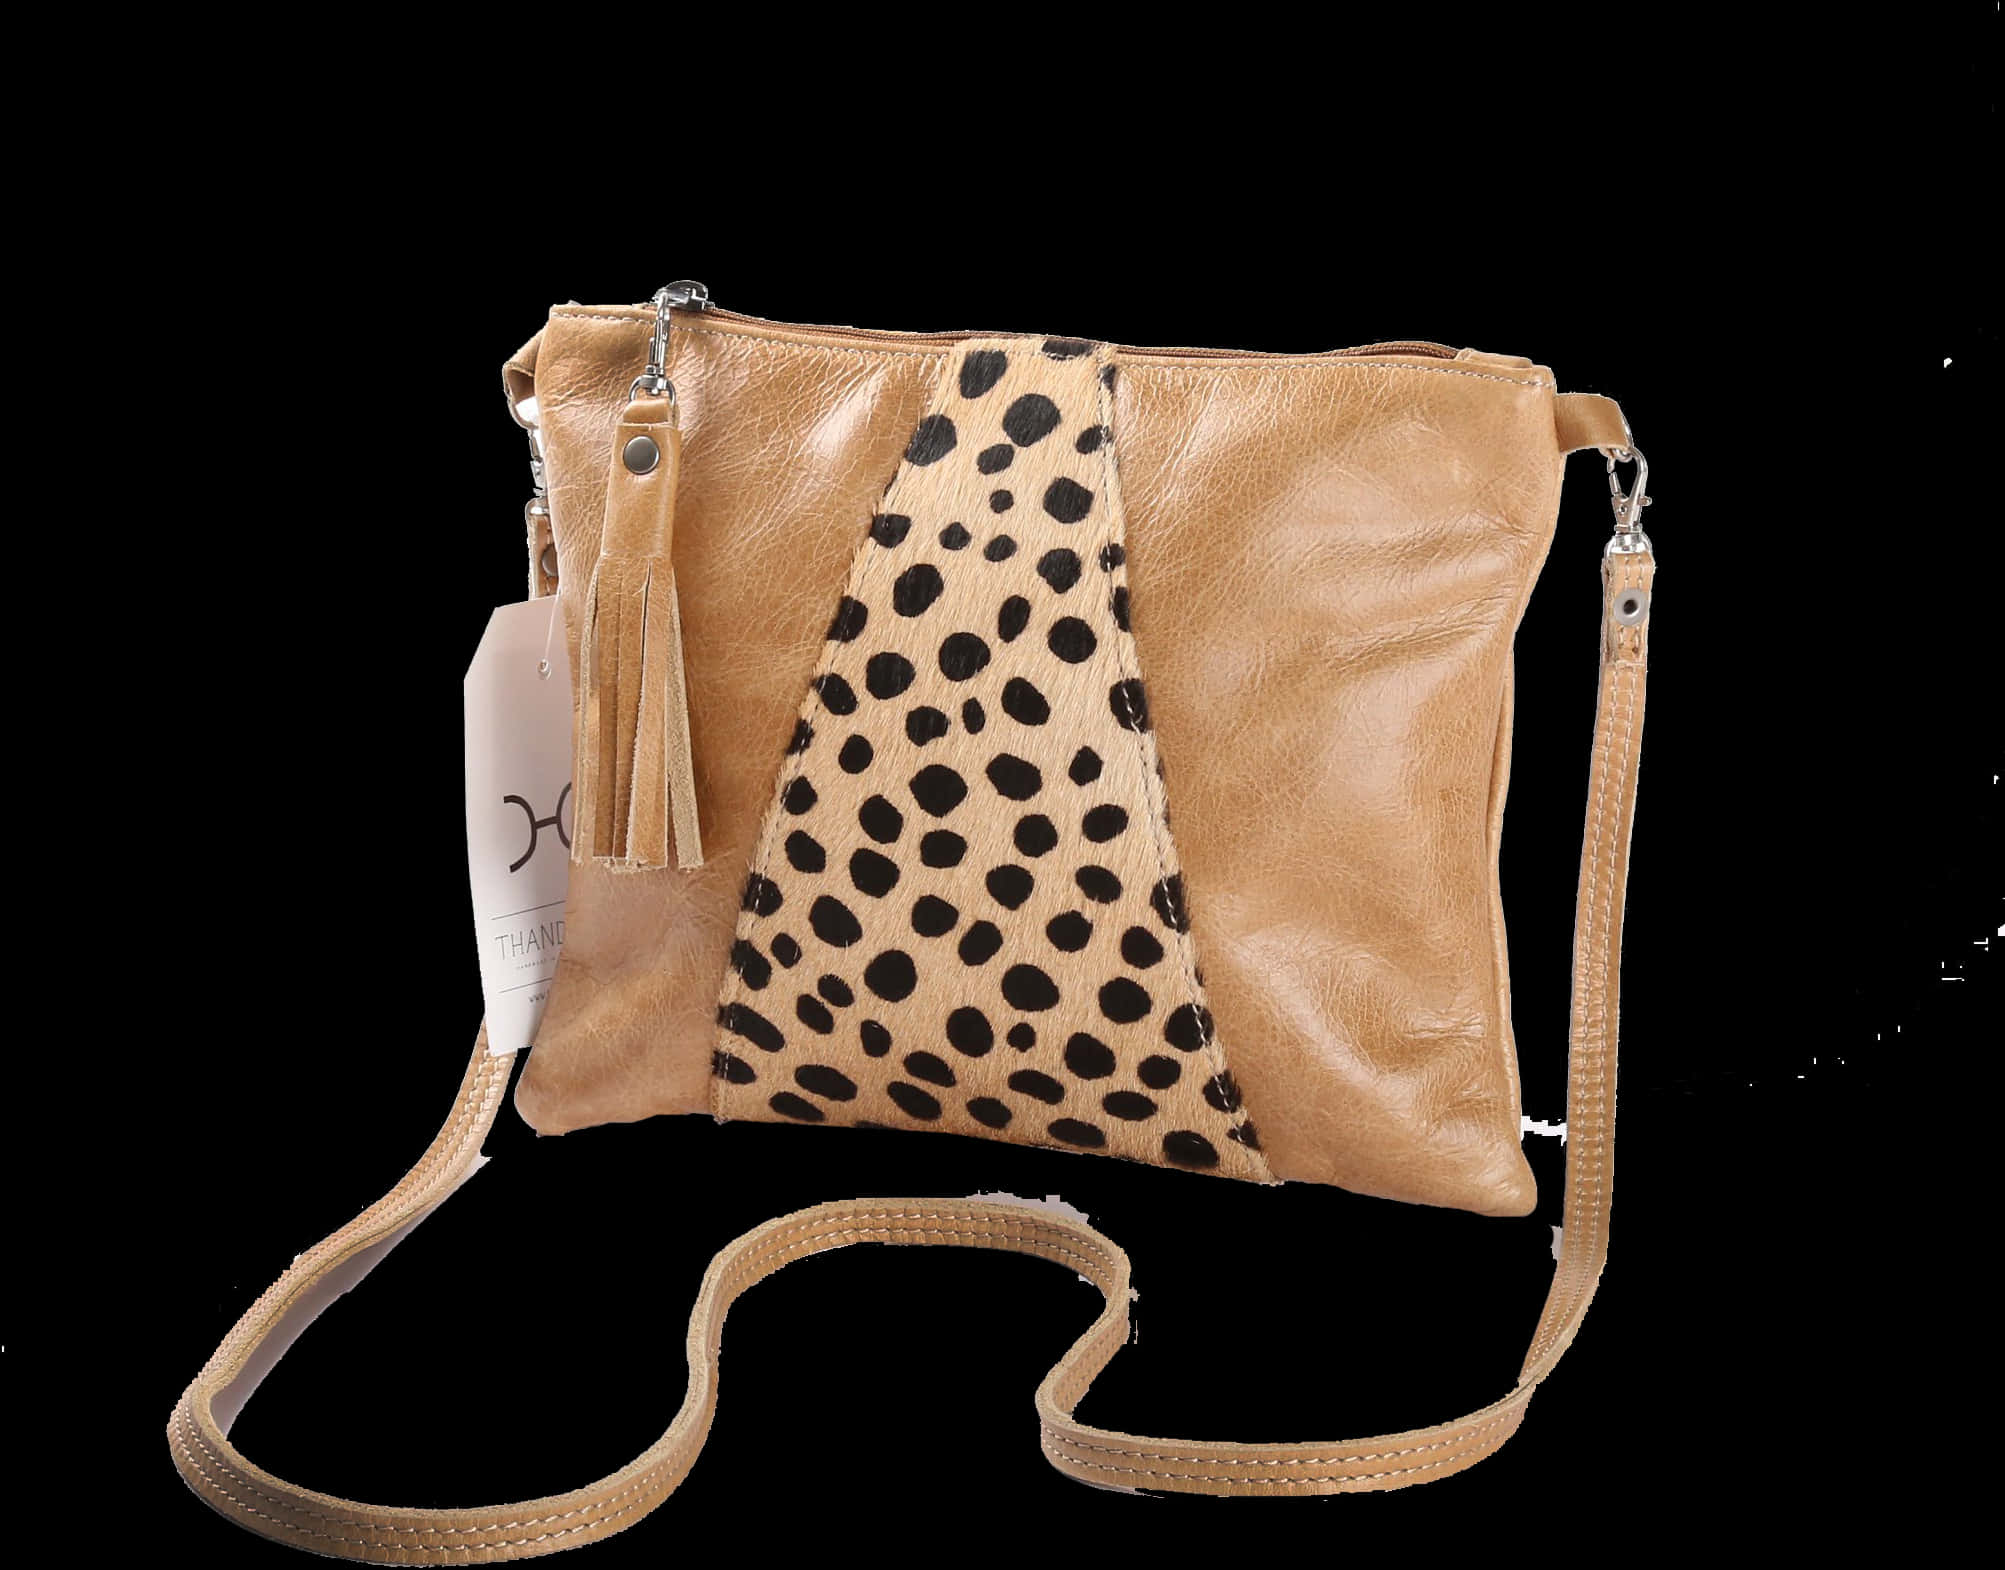 A Brown Purse With A Black And Tan Design